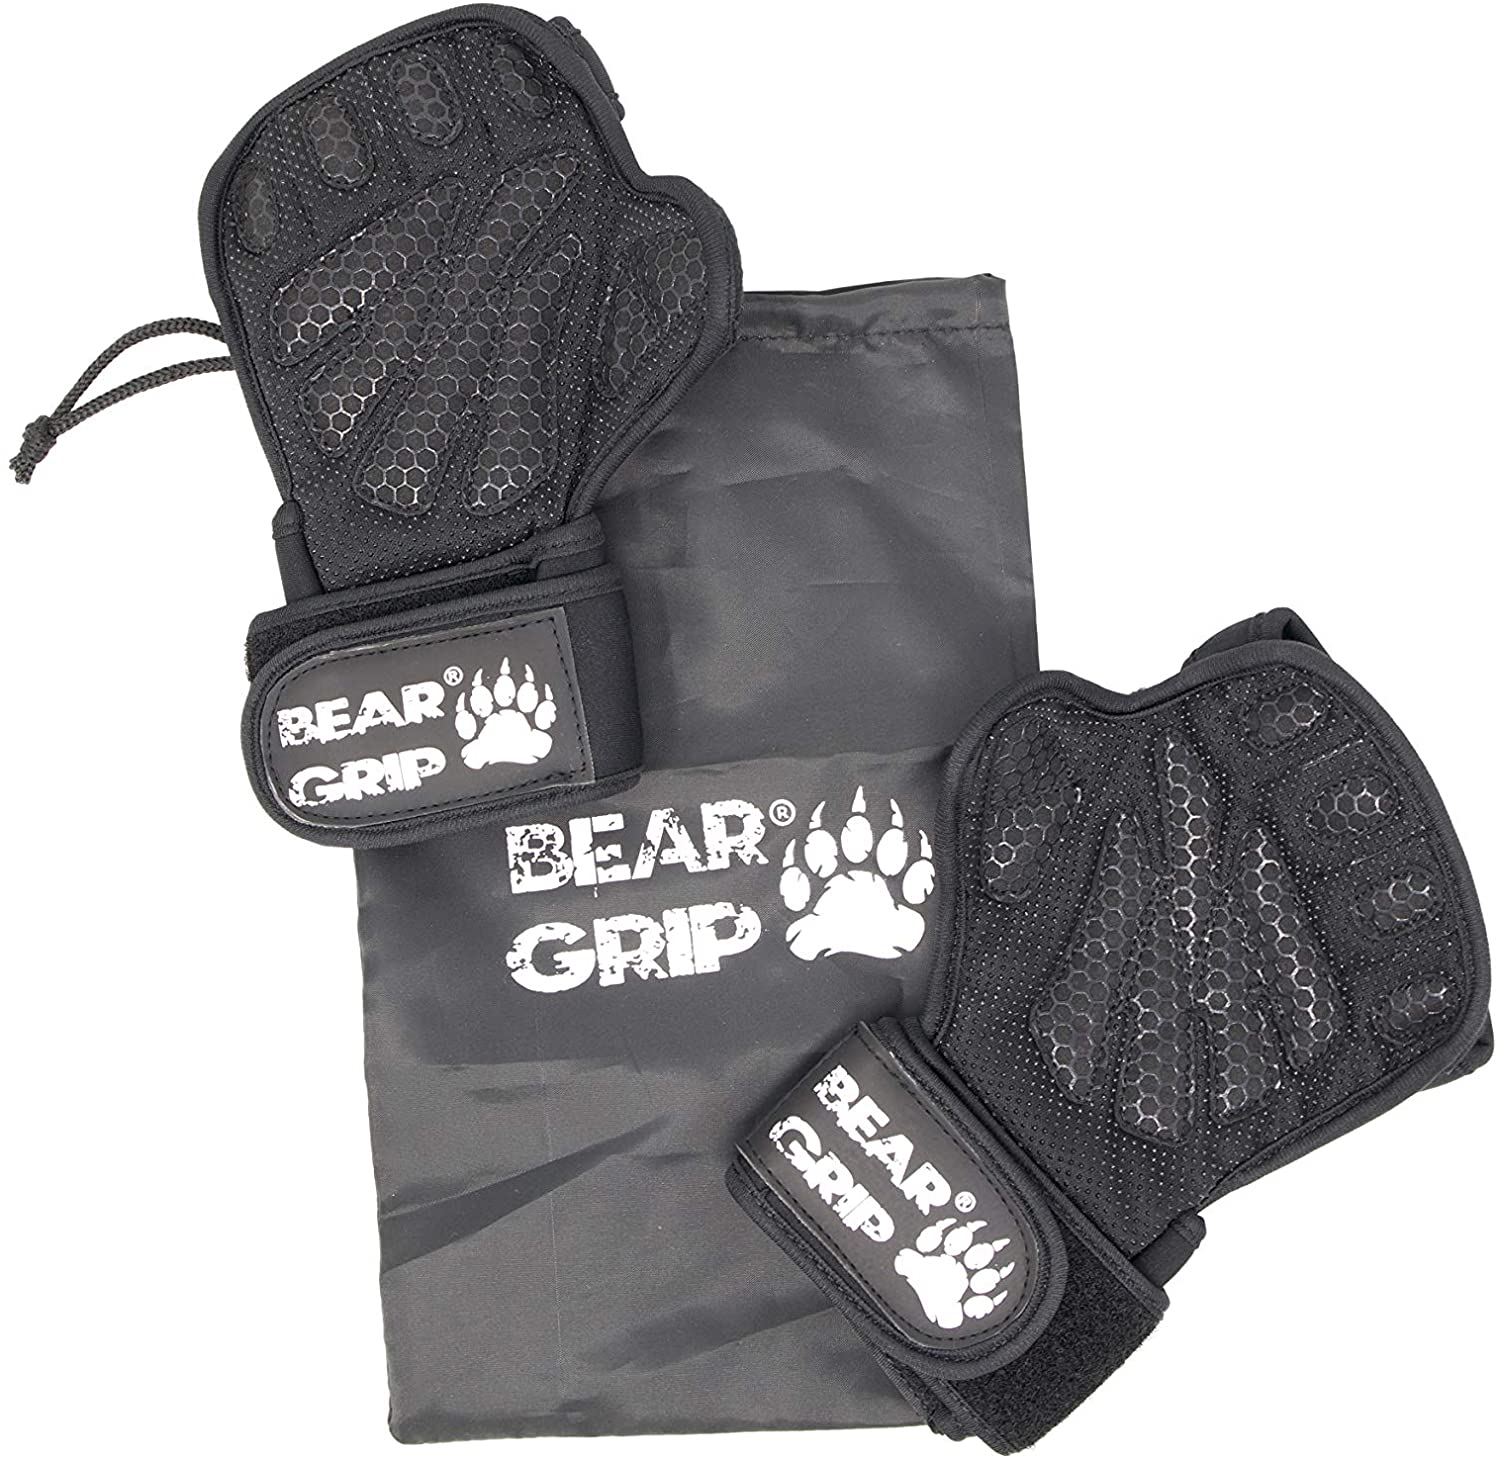 BEAR GRIP - Open Workout Gloves with extra Palm protection for Crossfit, Bodybuilding, callisthenics, Powerlifting